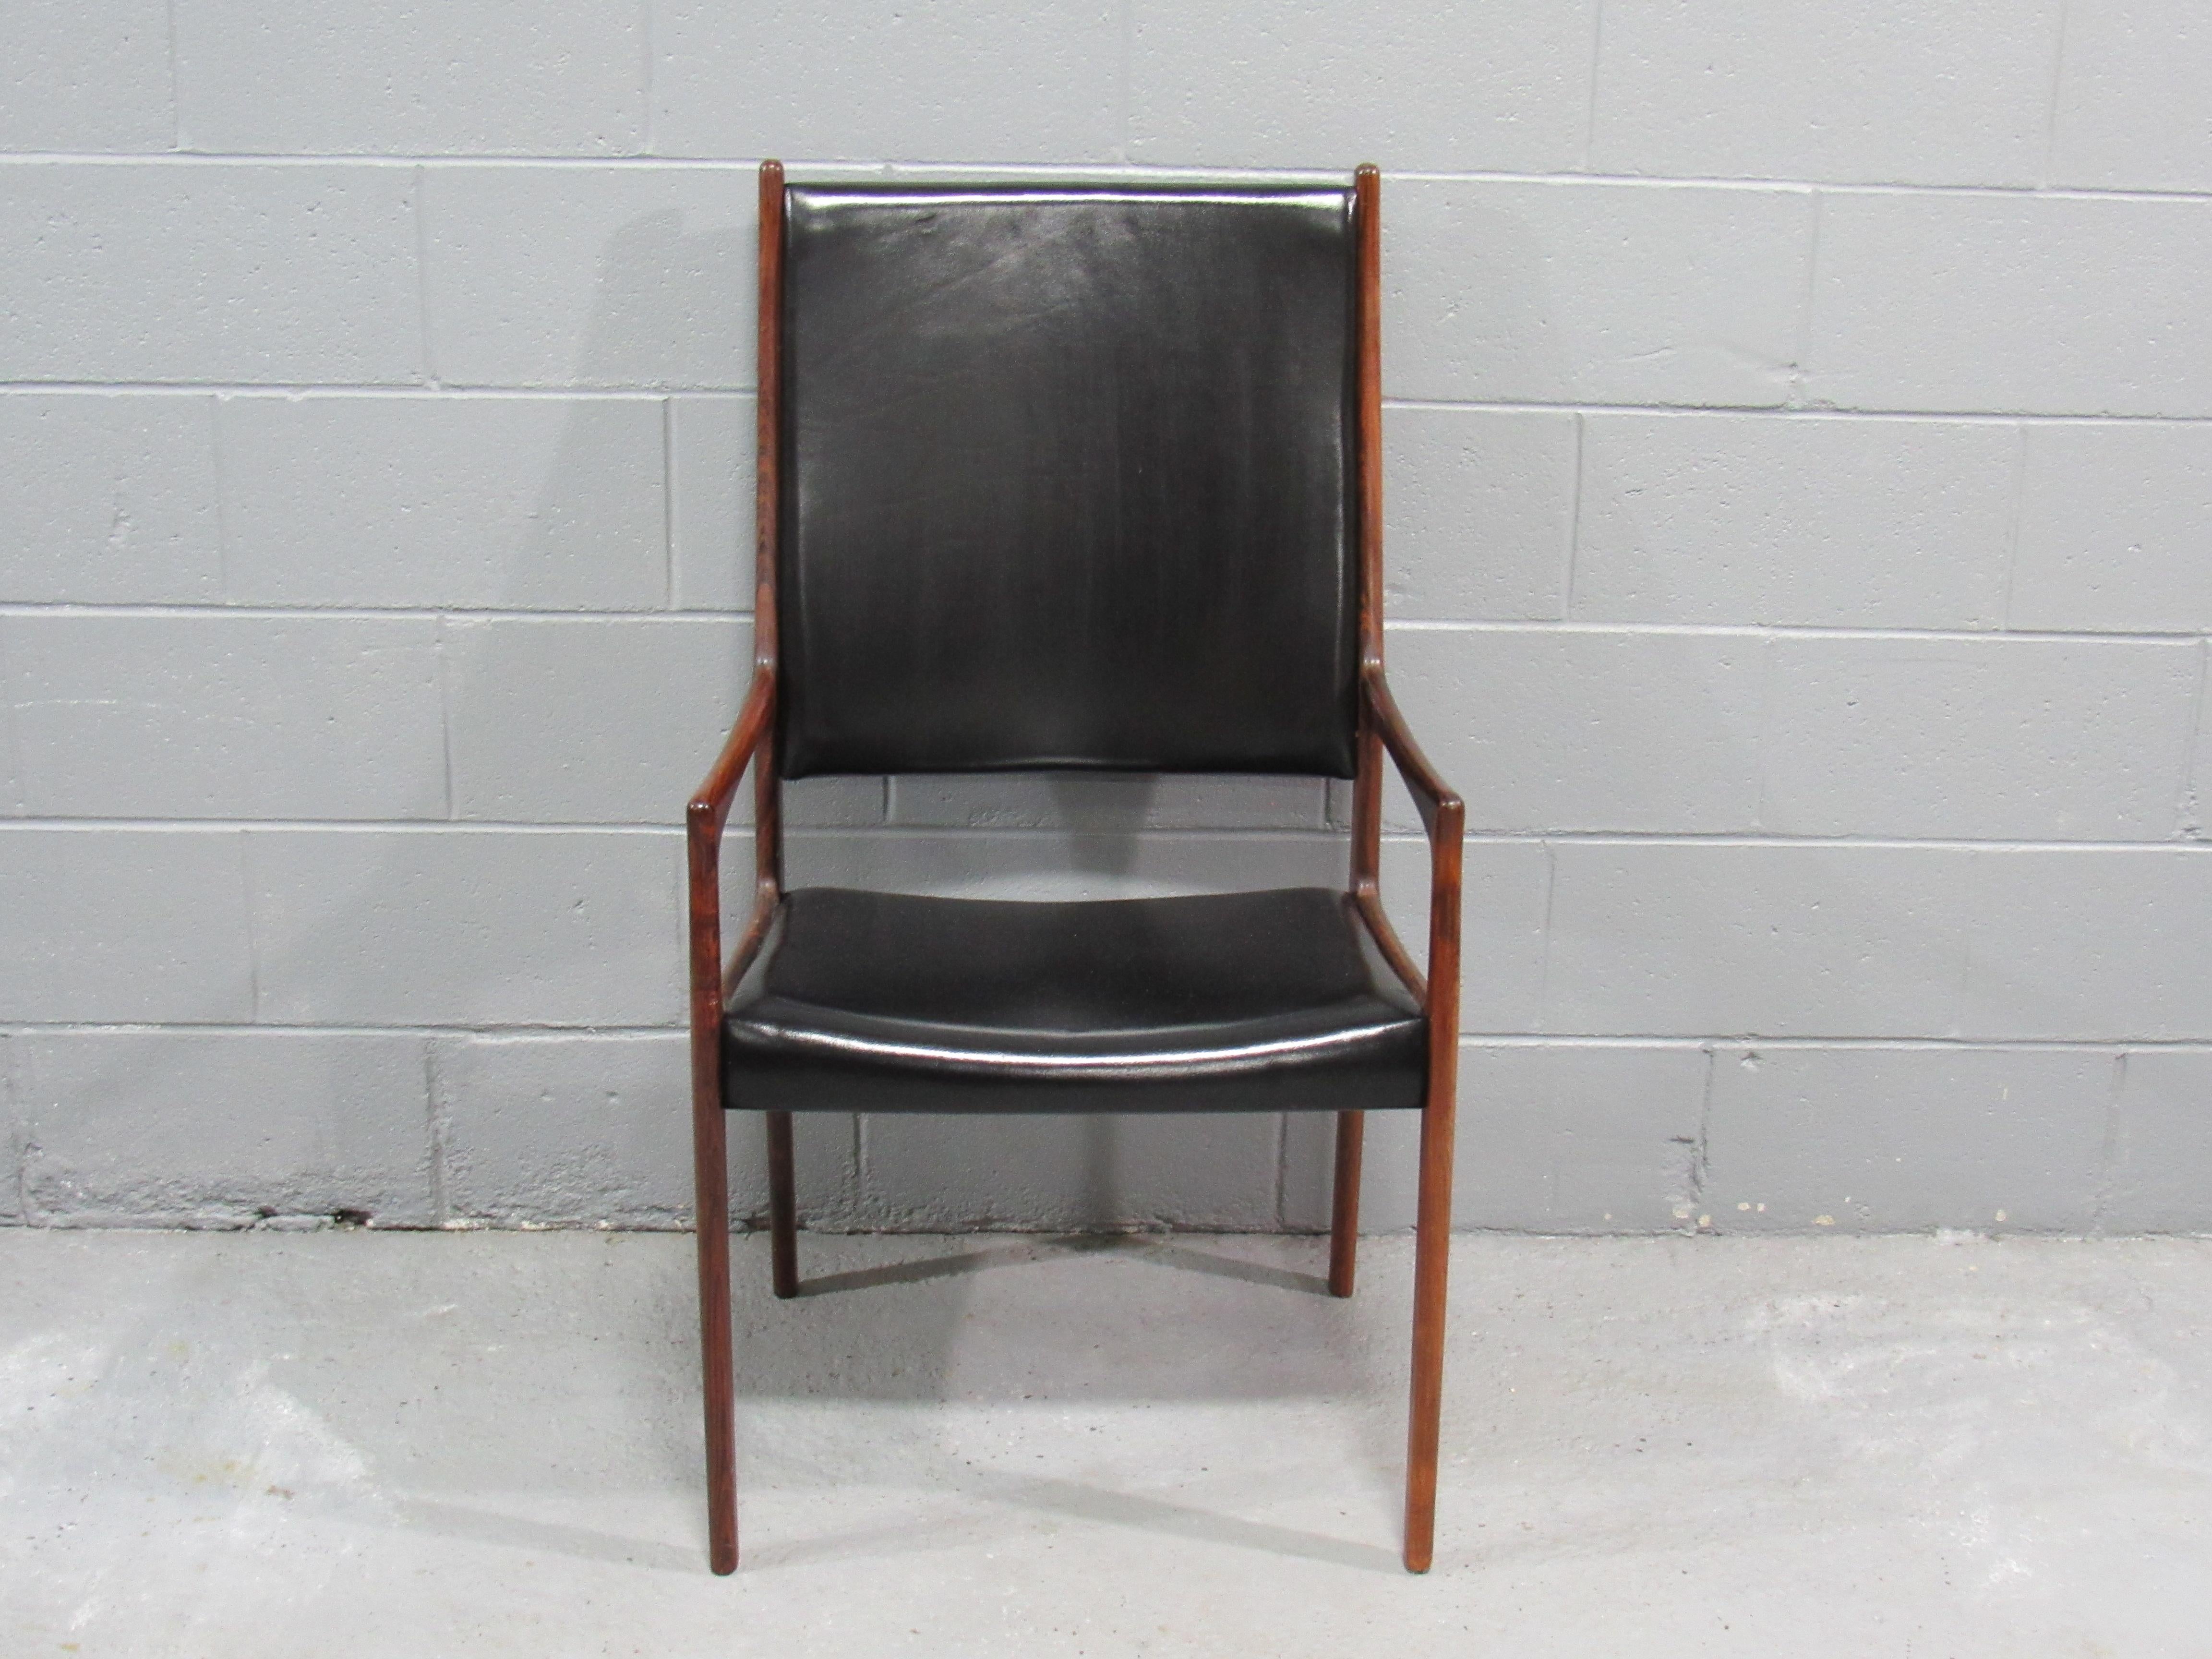 Set of 8 Mid-Century Danish Modern Rosewood Dining Chairs (6 dining chairs and 2 armchairs) by Johannes Andersen for Mogens Kold Mobelfabrik.  Very nice and large set of high back dining chairs designed by Johannes Andersen and manufactured by